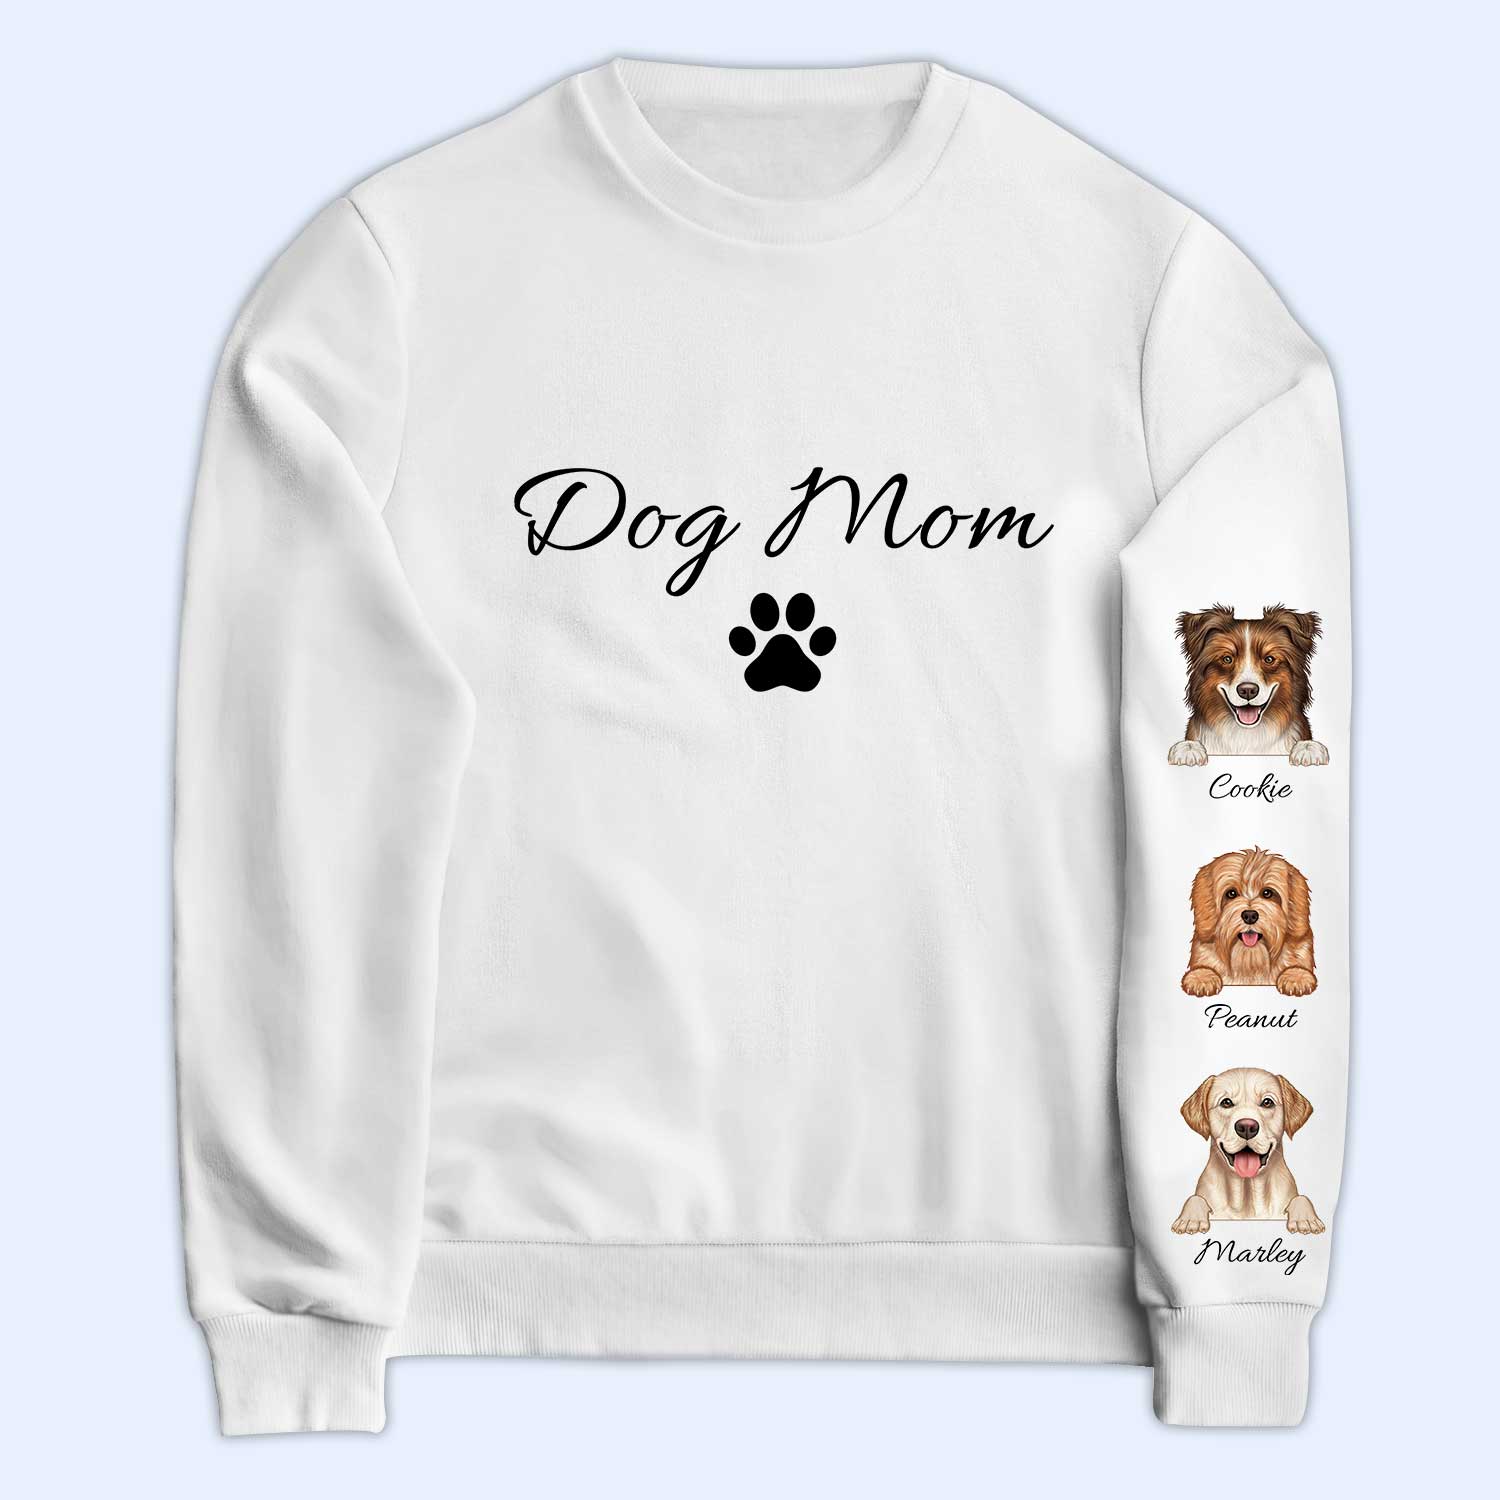 Dog Mom Dog Dad - Gift For Dog Lovers - Personalized Sweatshirt With Sleeve Imprint